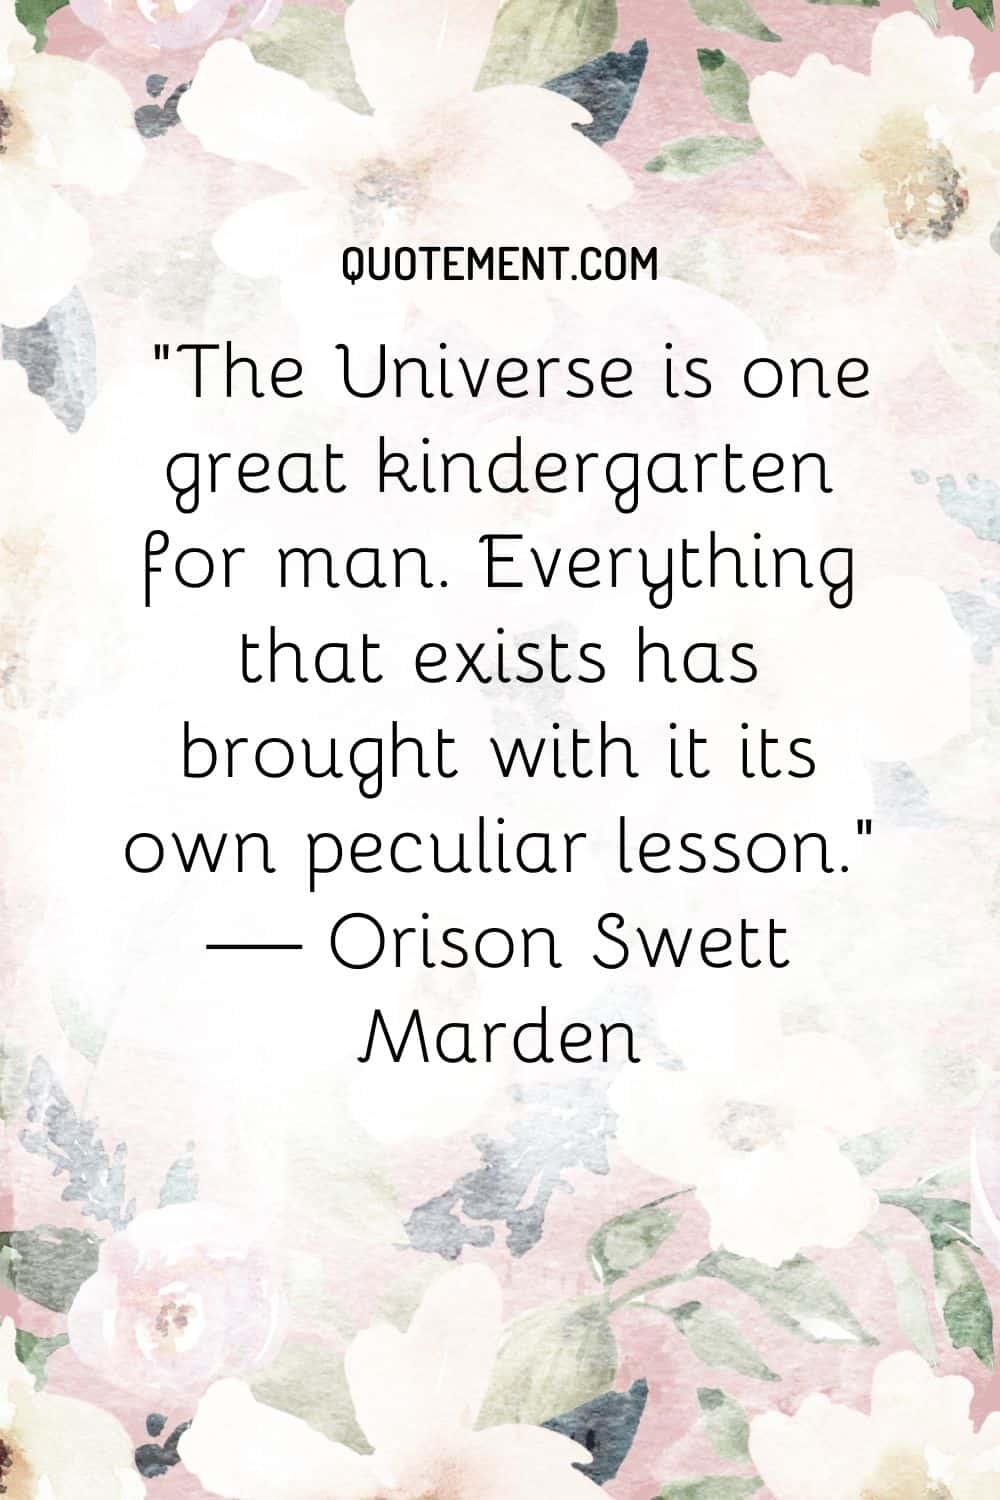 The Universe is one great kindergarten for man. Everything that exists has brought with it its own peculiar lesson